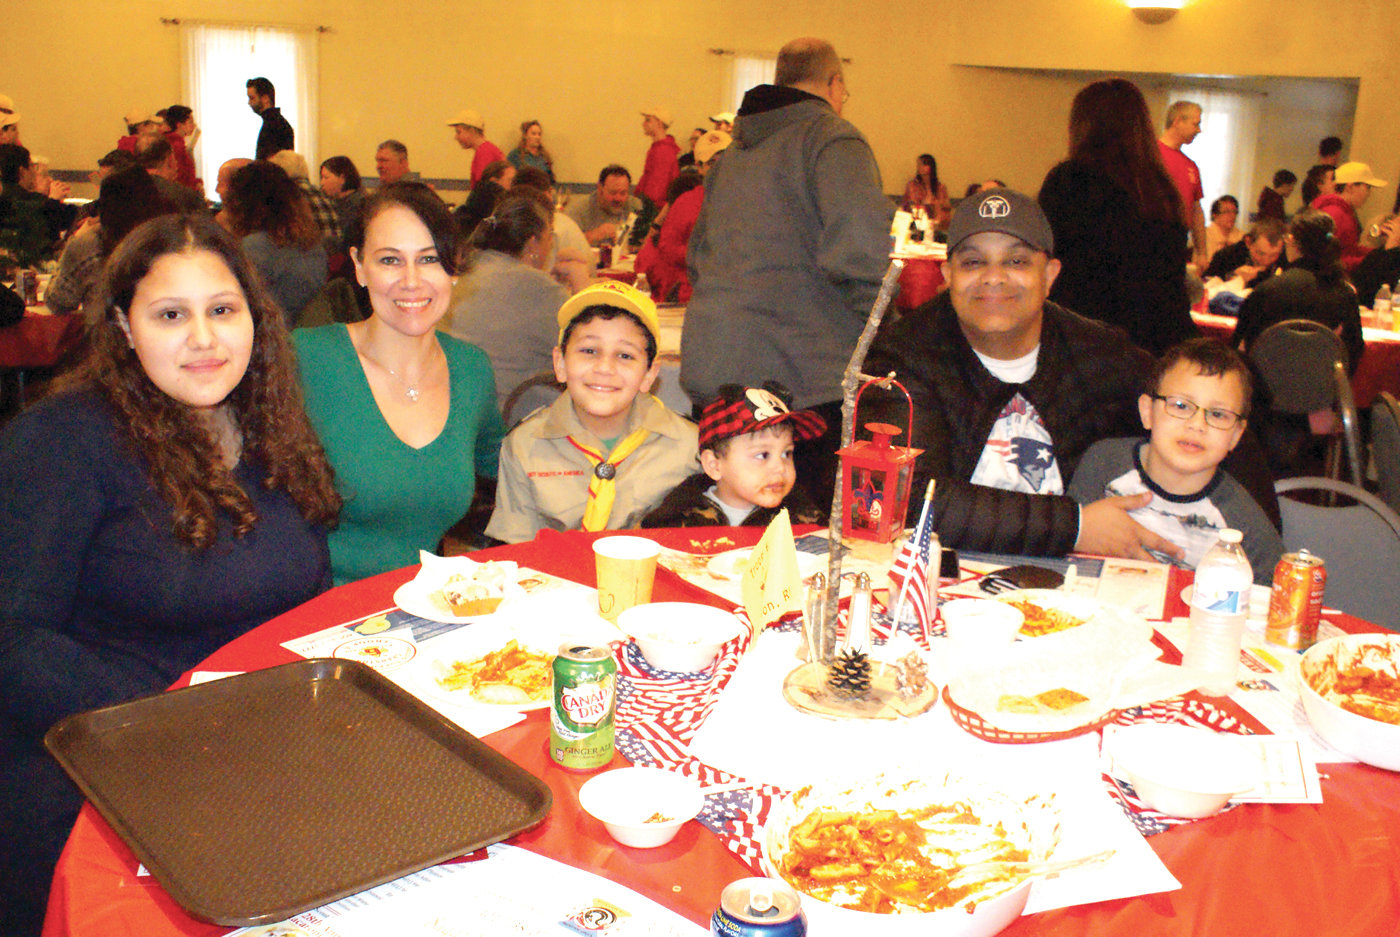 A FAMILY MATTER: Boy Scout Nicholas Espinal of Troop 6 Cranston took time from serving guests to pose with his family during Sunday’s dinner. Pictured are 15-year-old Emily, his mother, Cheryl, 10-year-old Nicholas, 2-year-old Evan, his father, Carlos, and 7-year-old Carson.